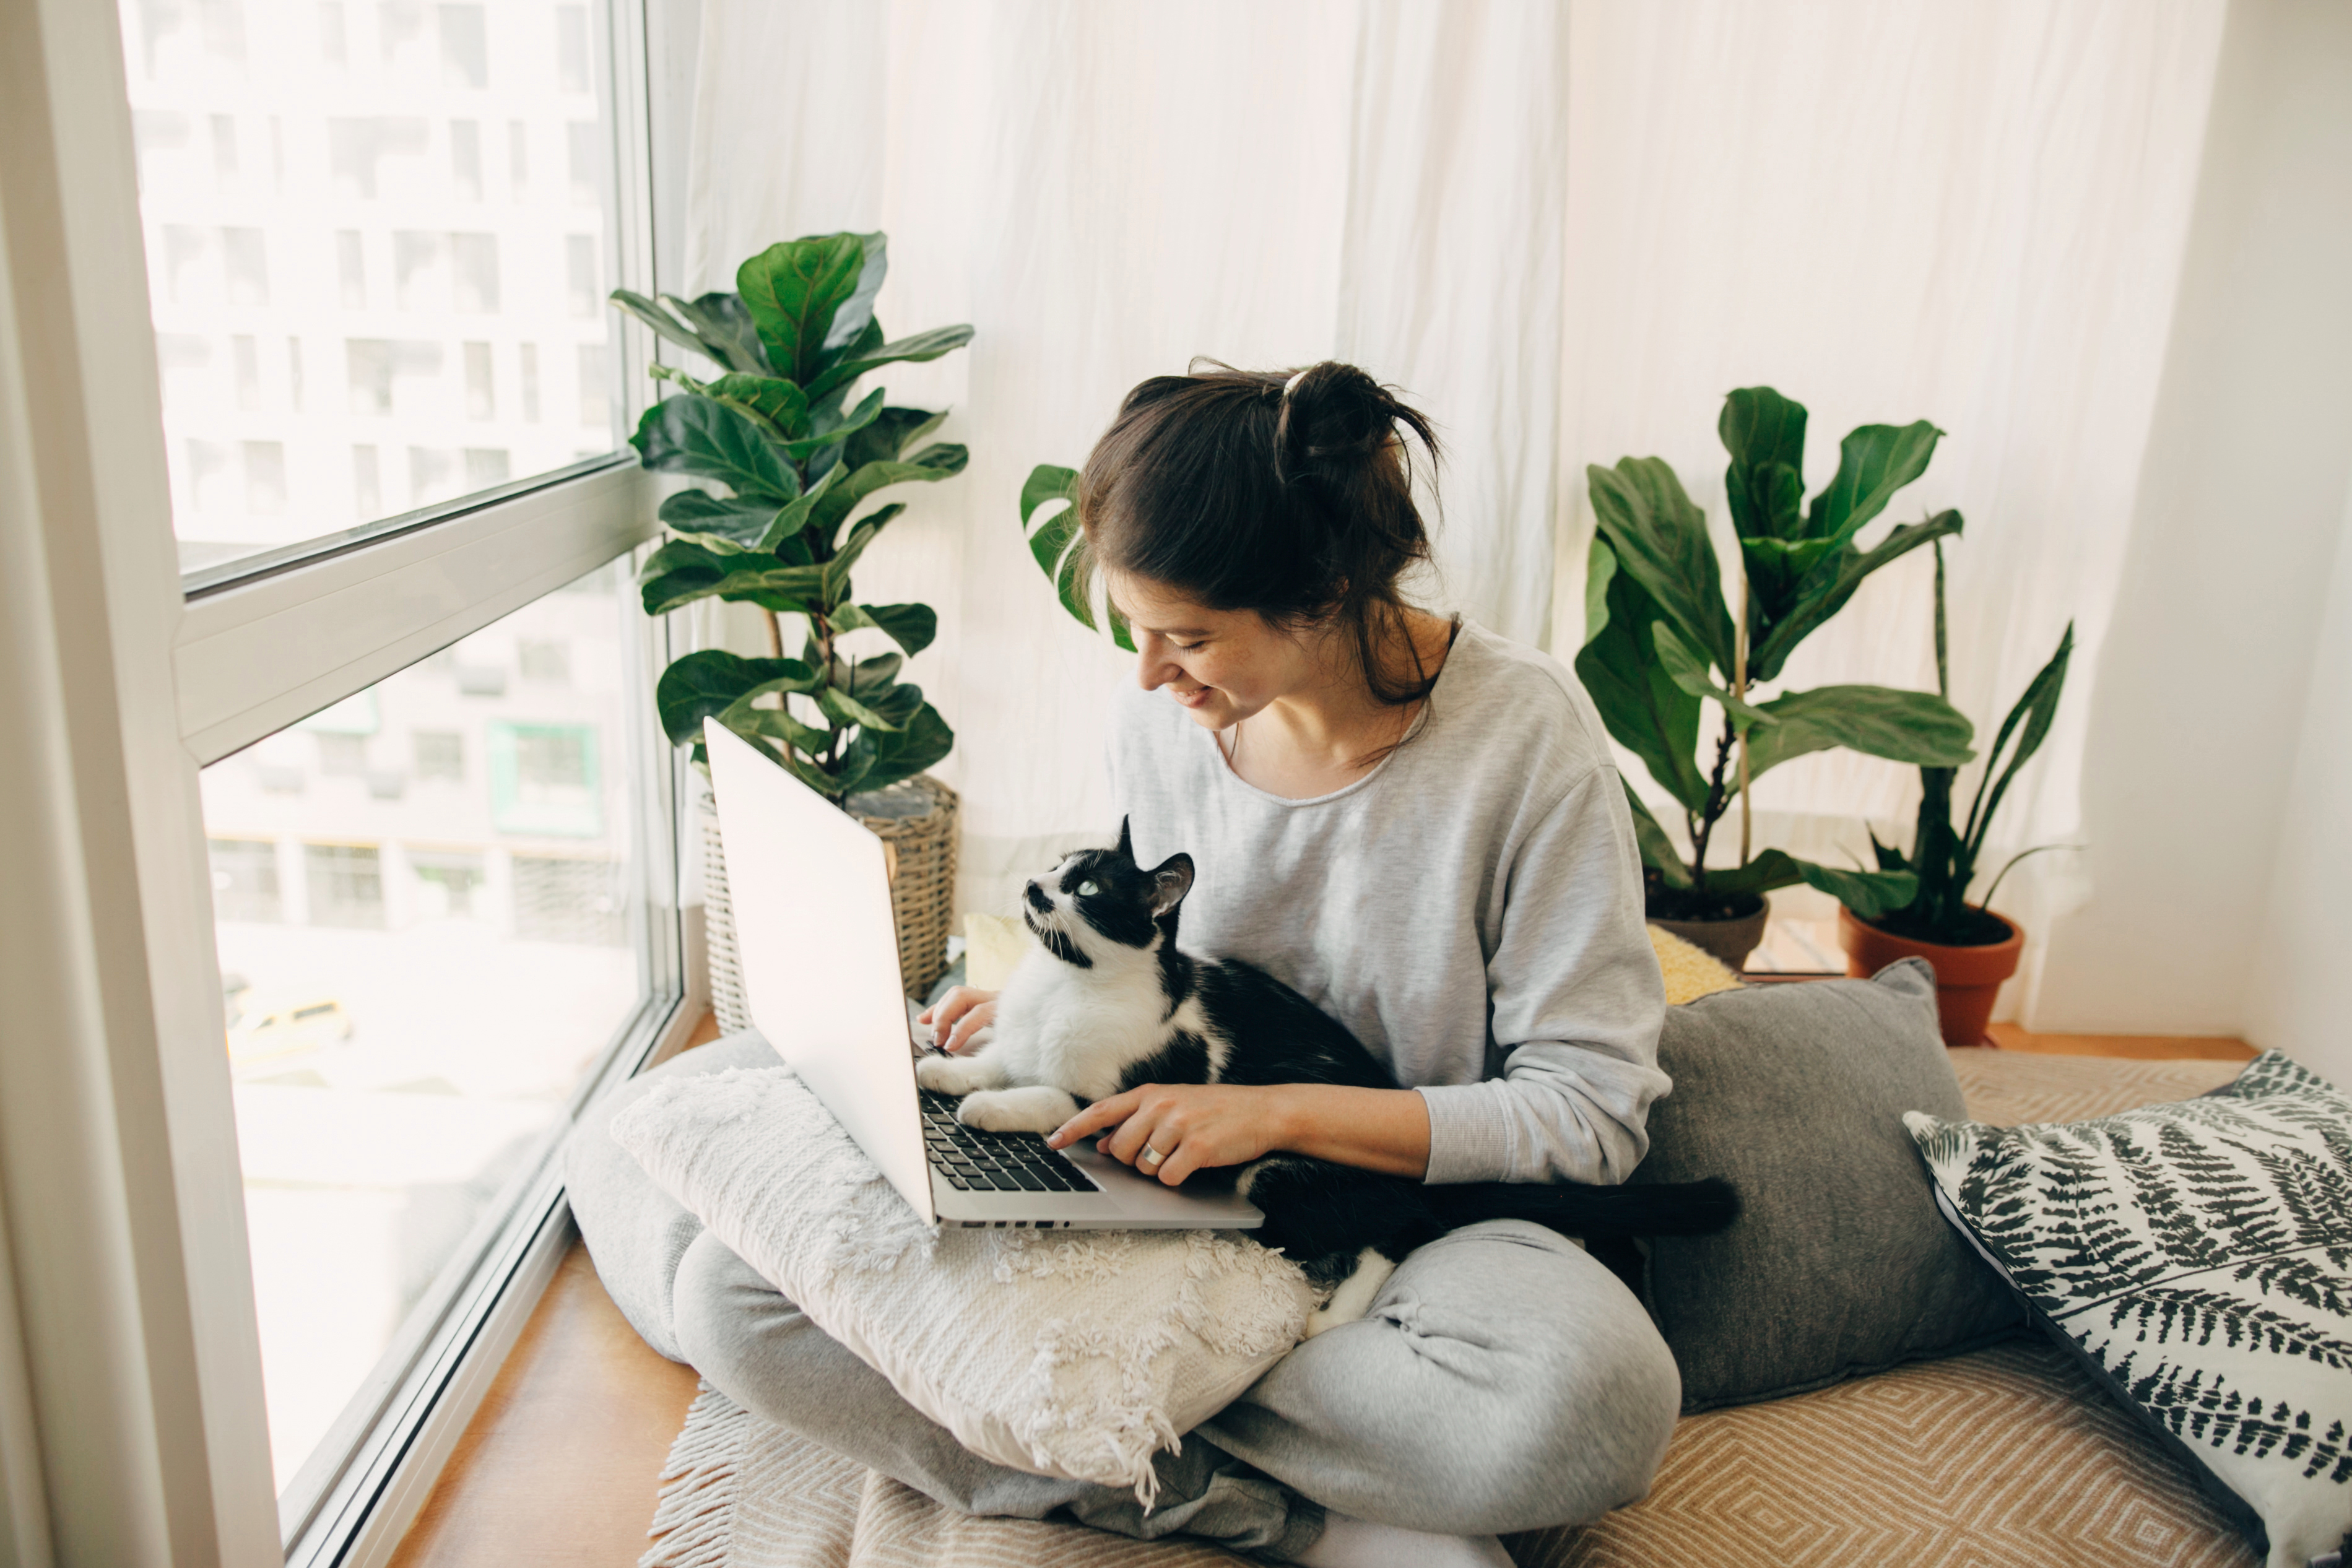 Casual girl working on laptop with her cat, sitting together in modern room with pillows and plants. Home office. Cute cat helping owner during quarantine, loyal companion. Stay home stay safe